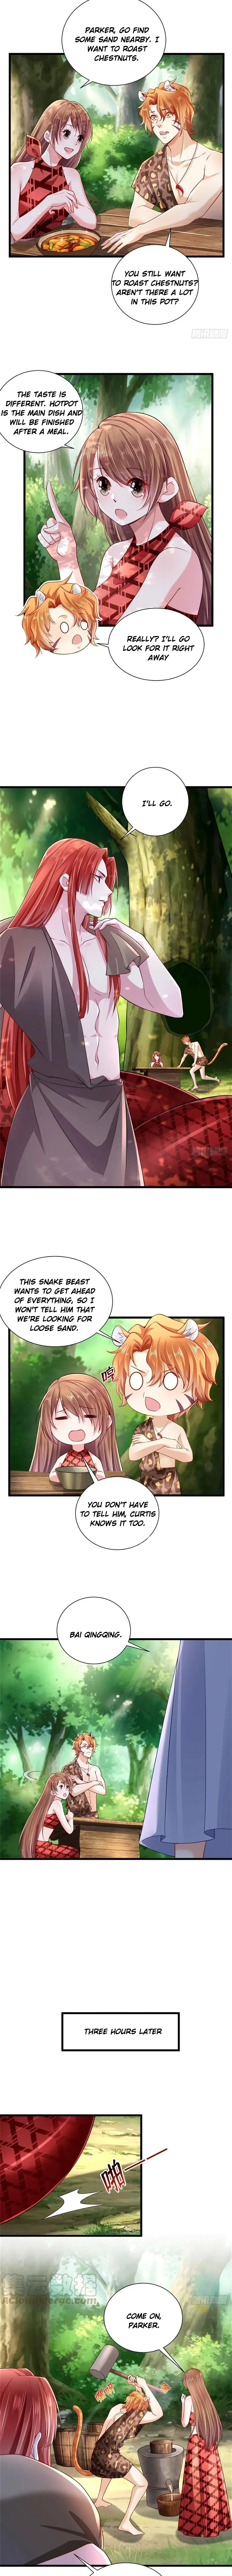 Beauty and the Beasts Chapter 255 page 5